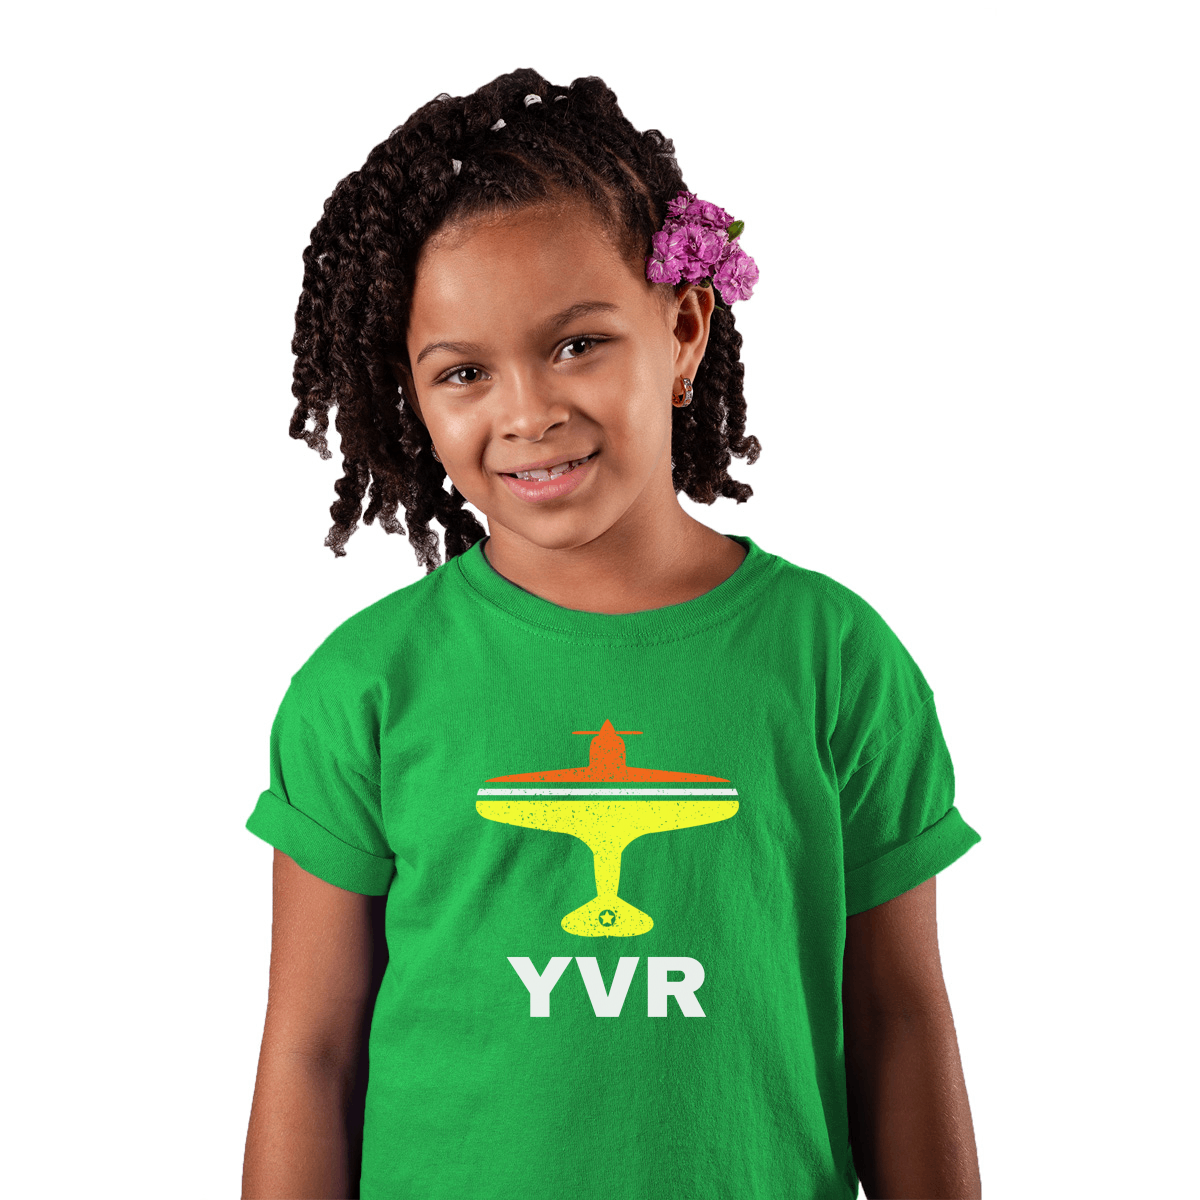 Fly Vancouver YVR Airport Kids T-shirt | Green